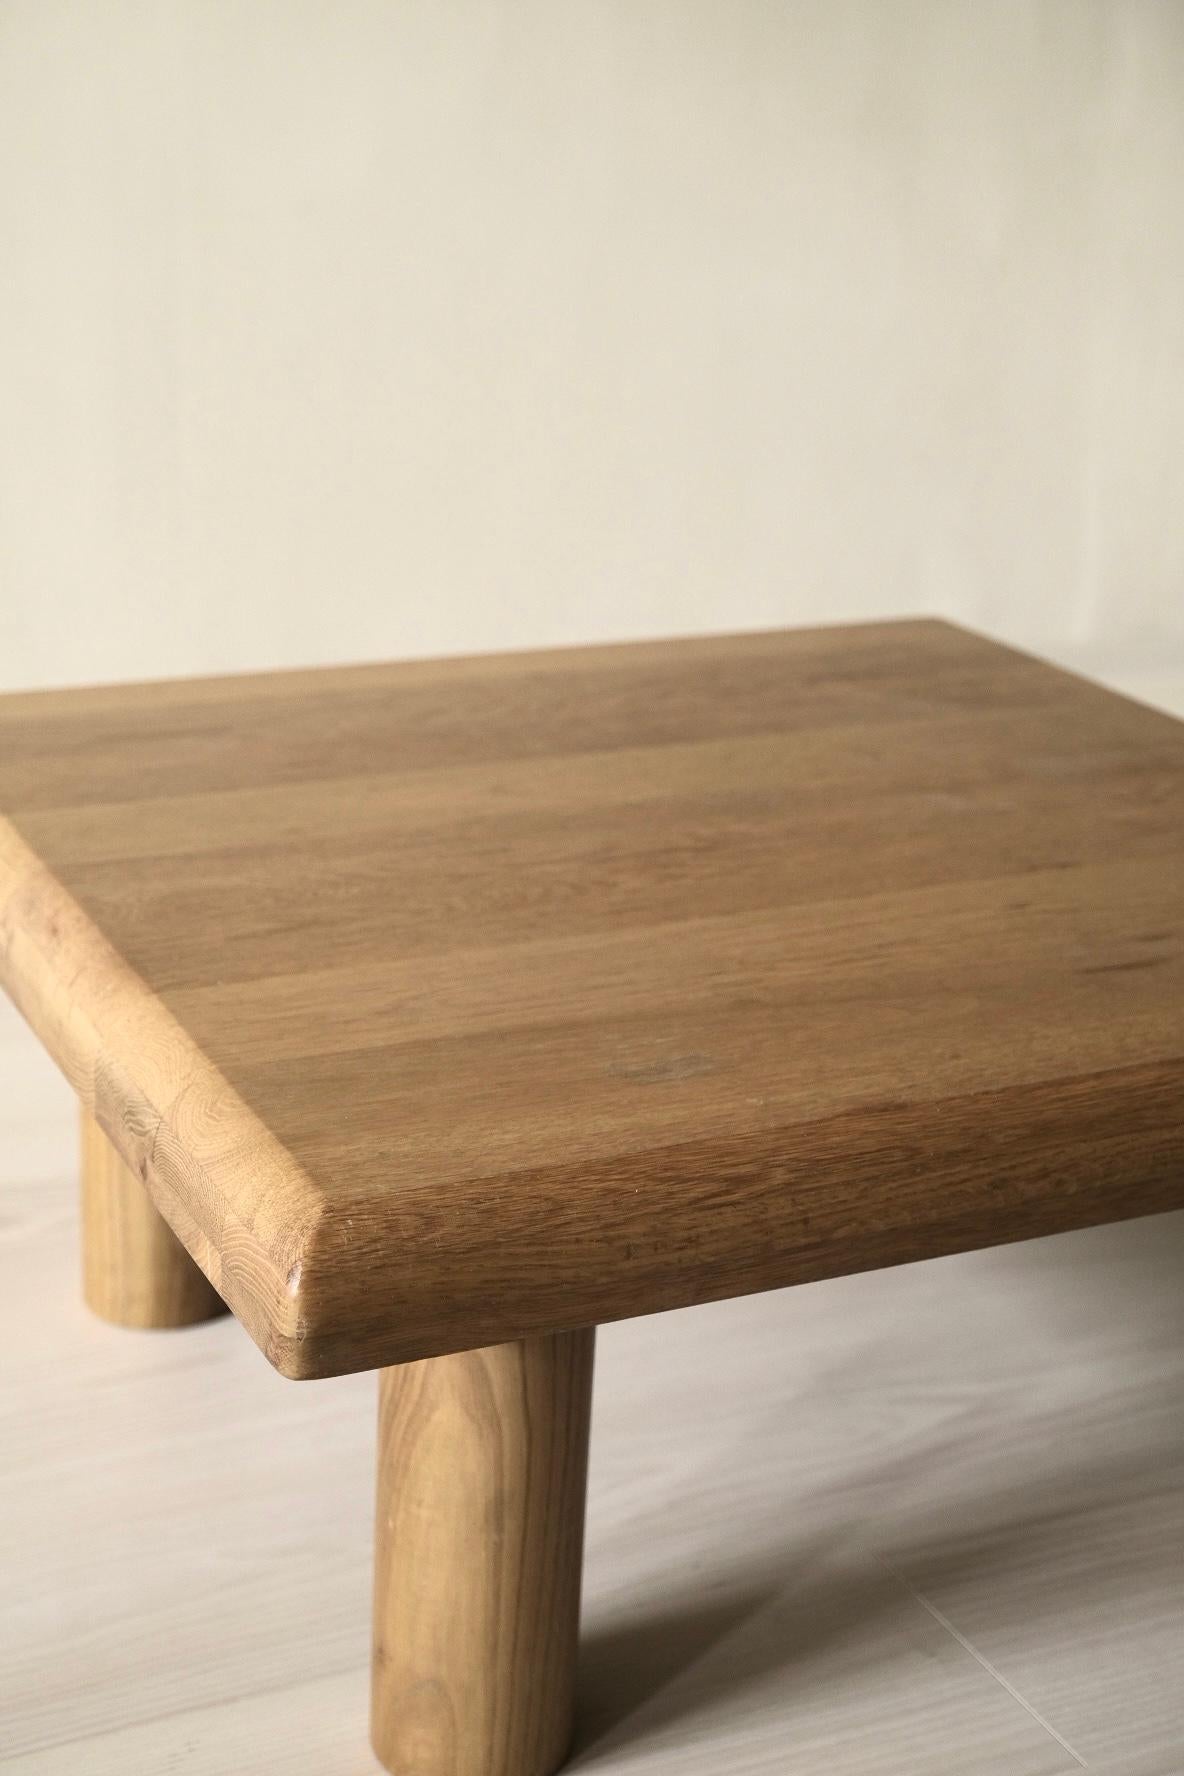 Oak Coffee Table in the Manner of Charlotte Perriand, 1960s For Sale